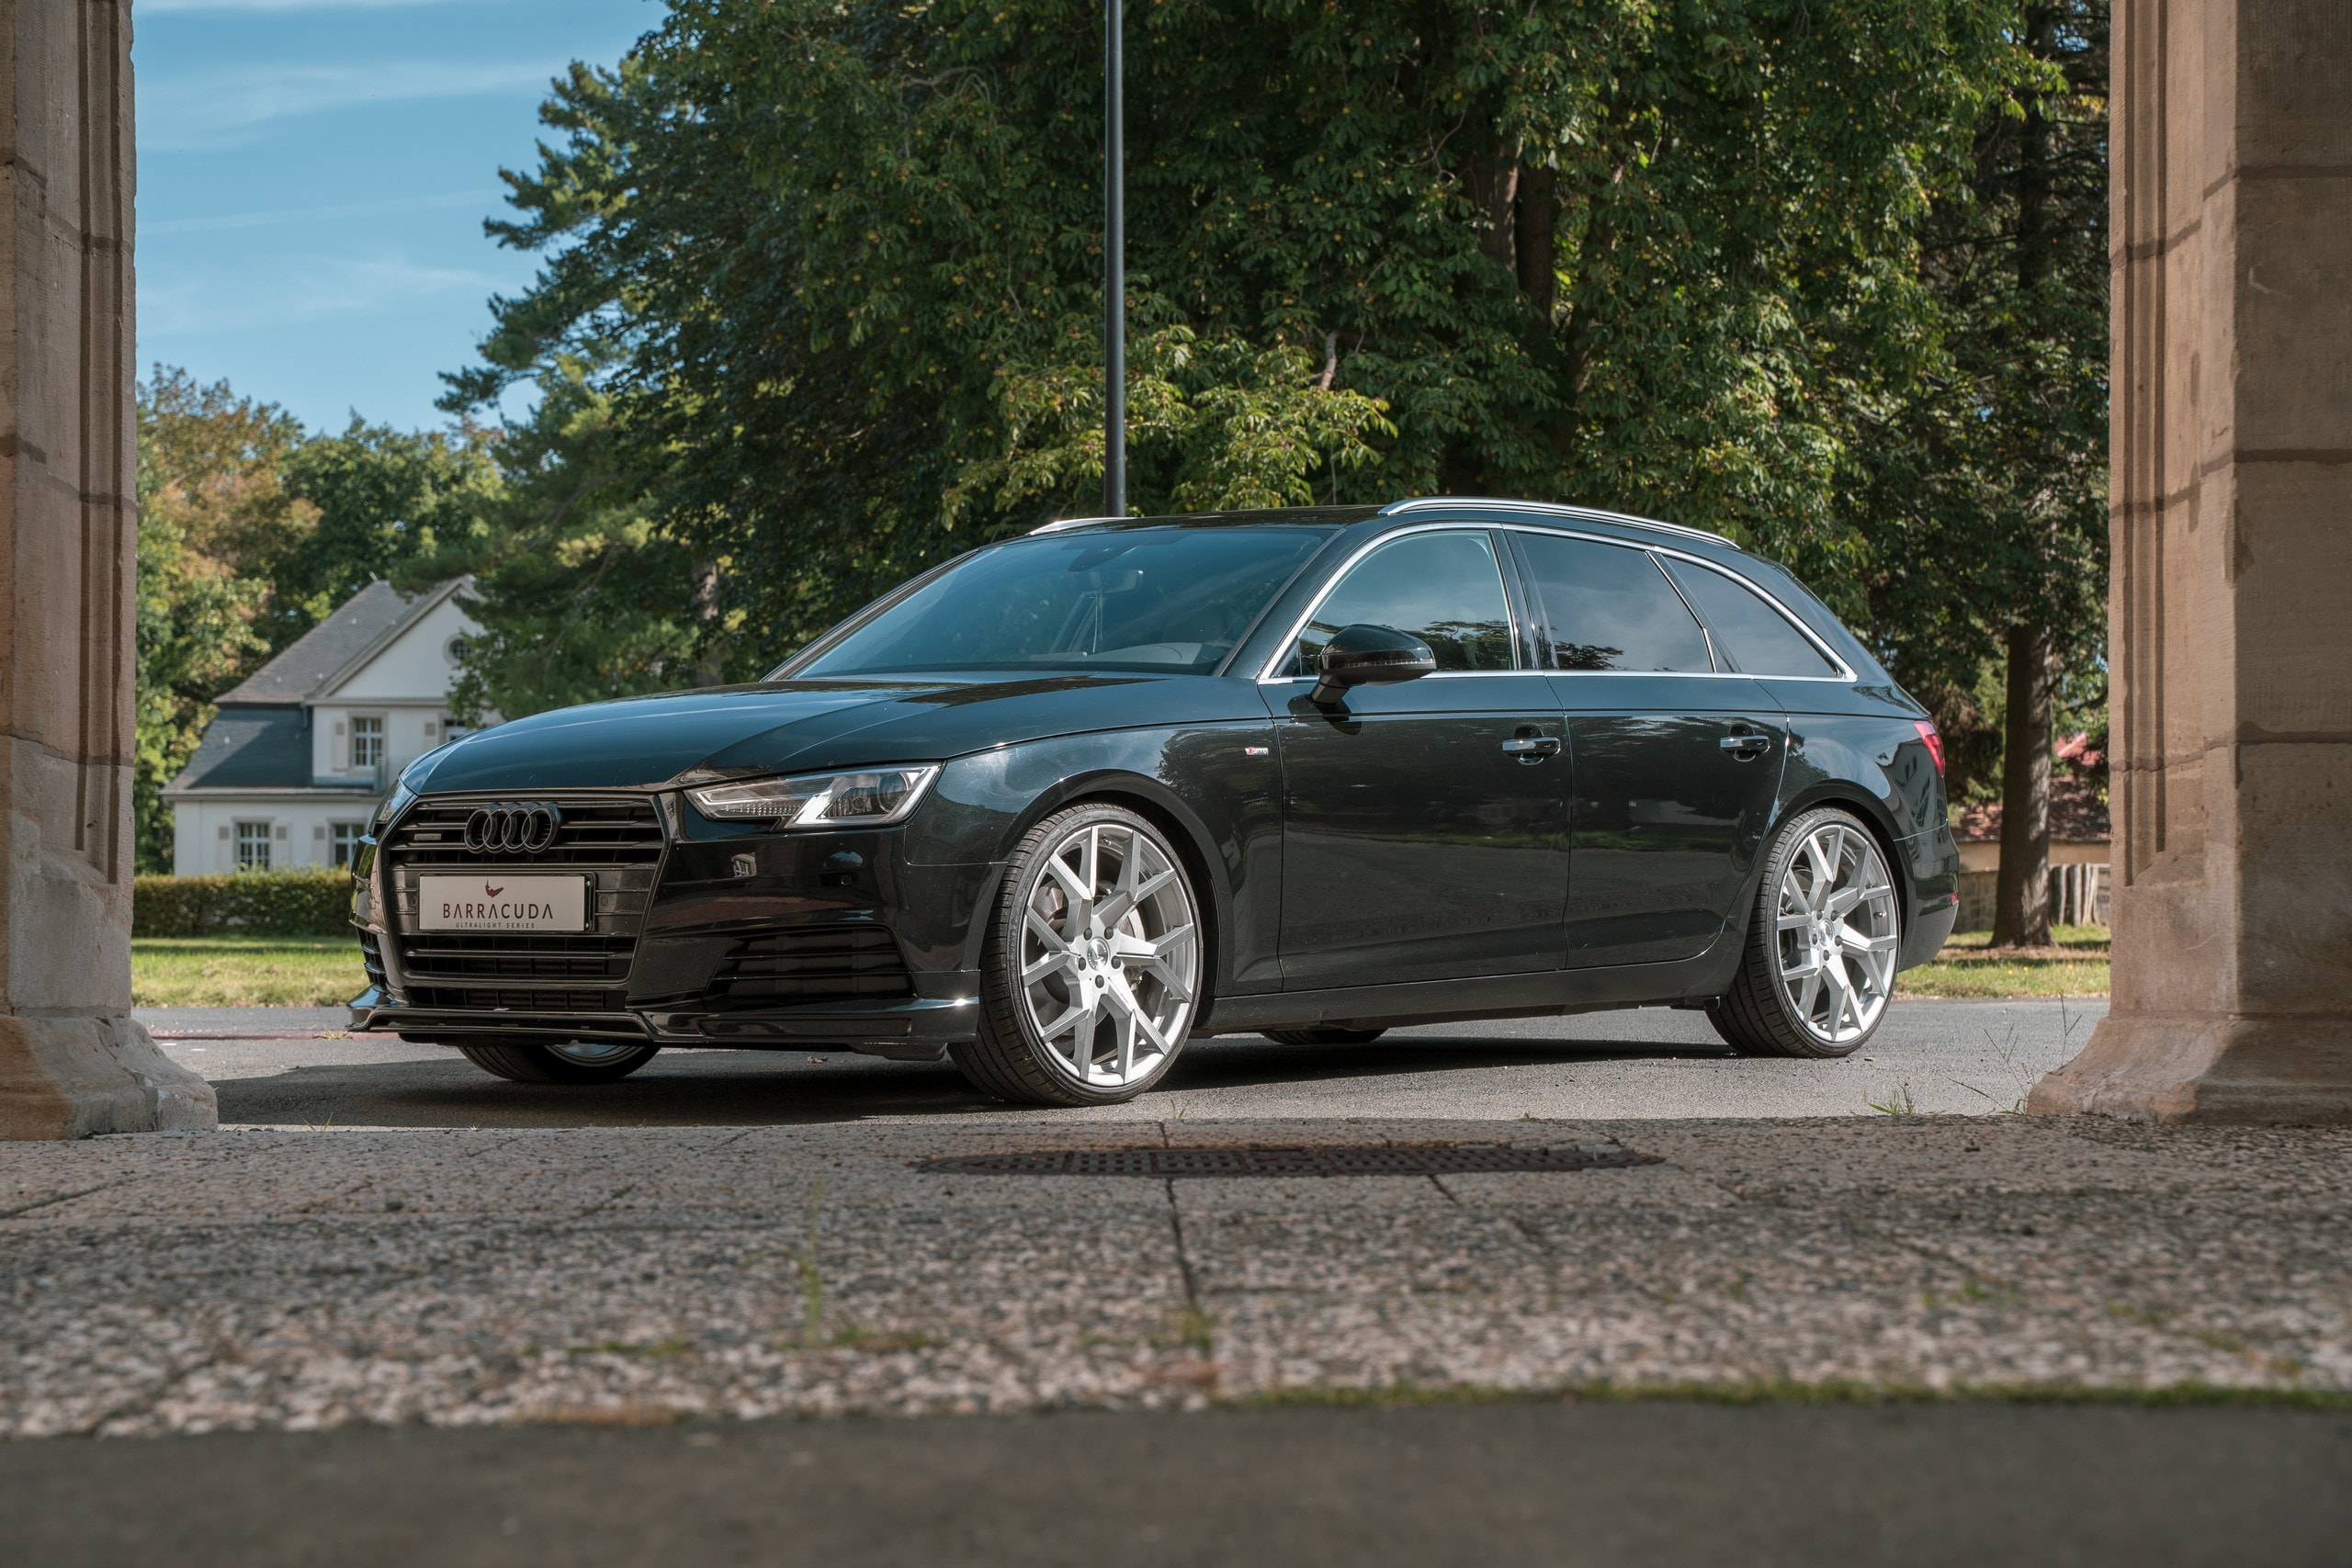 Audi A4 Avant Gets a Stylish Unofficial Makeover to Remind Us It's